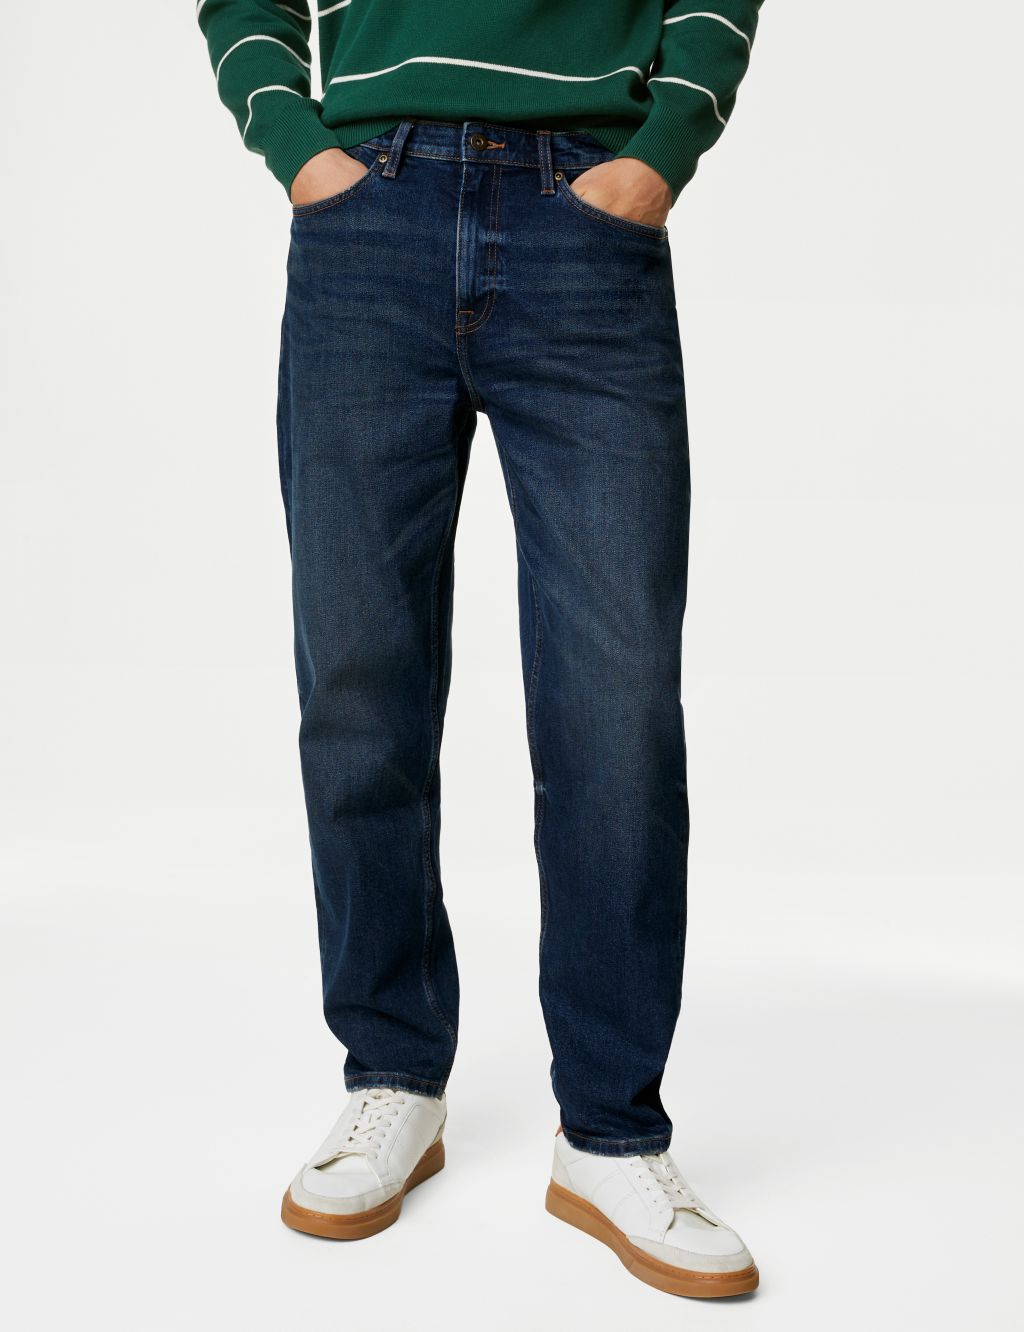 Relaxed Tapered Vintage Wash Jeans image 1